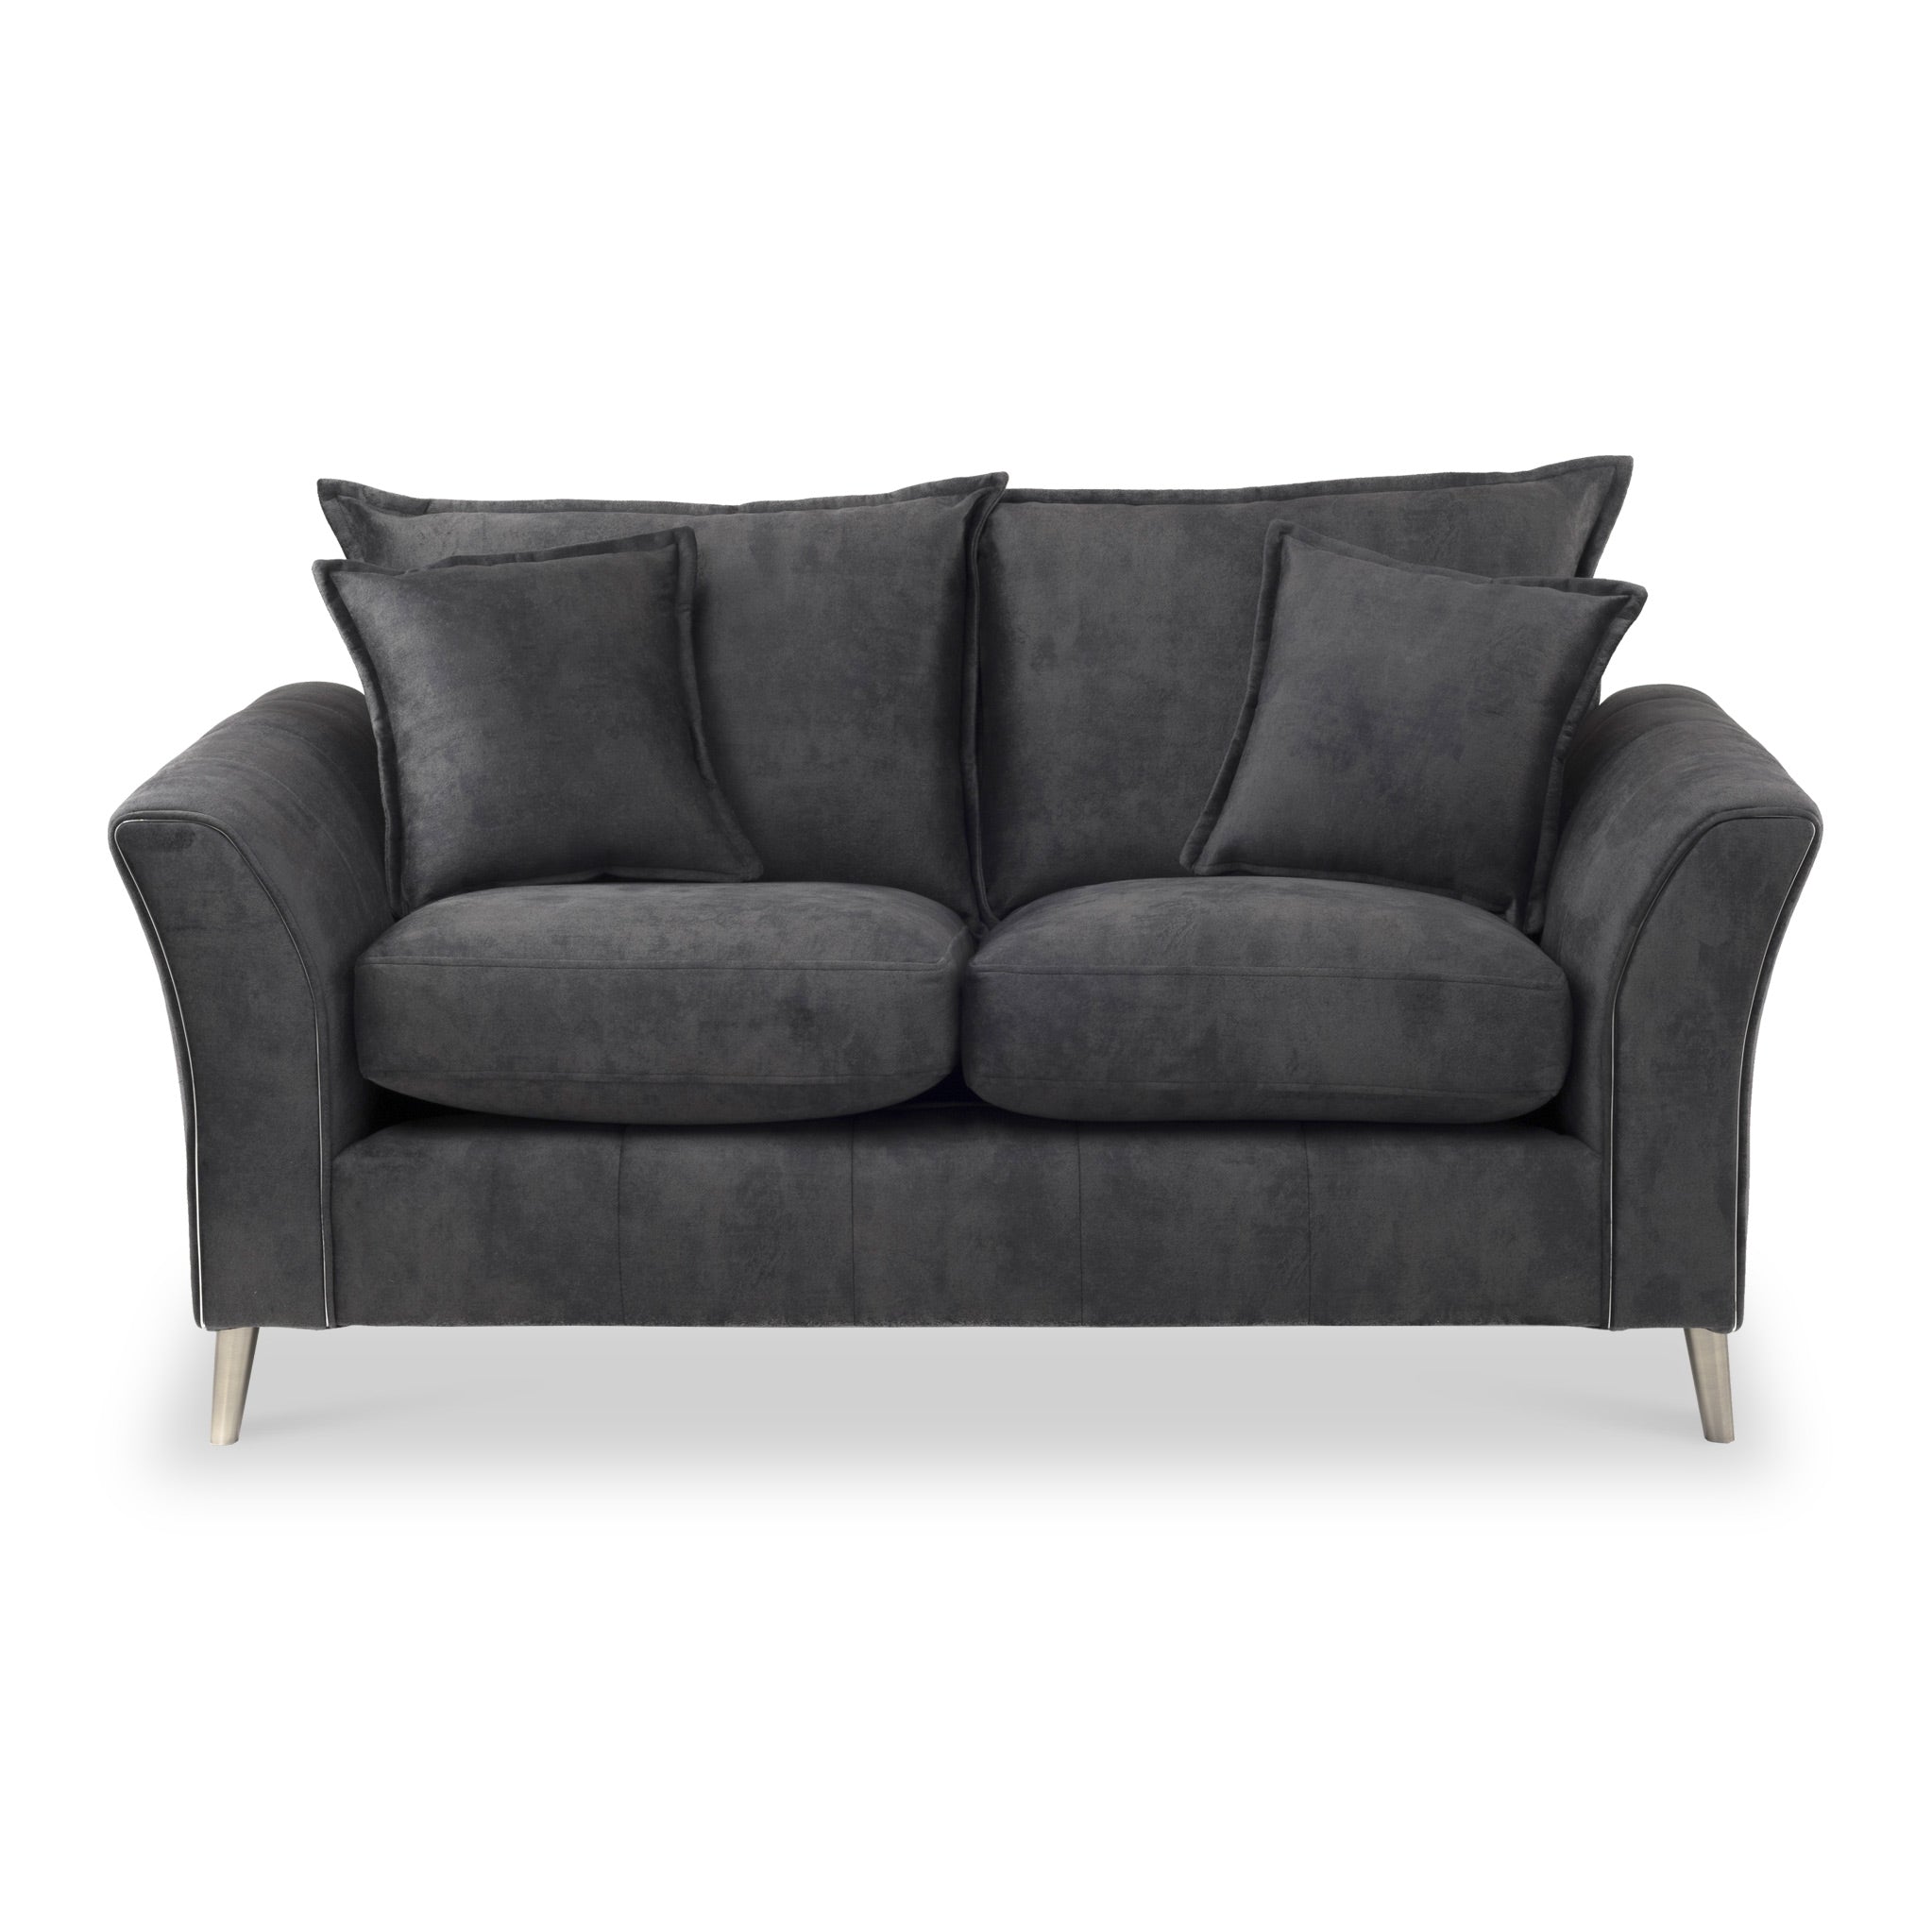 Madrid 2 Seater Sofa Grey Blue Fabric Couch Roseland